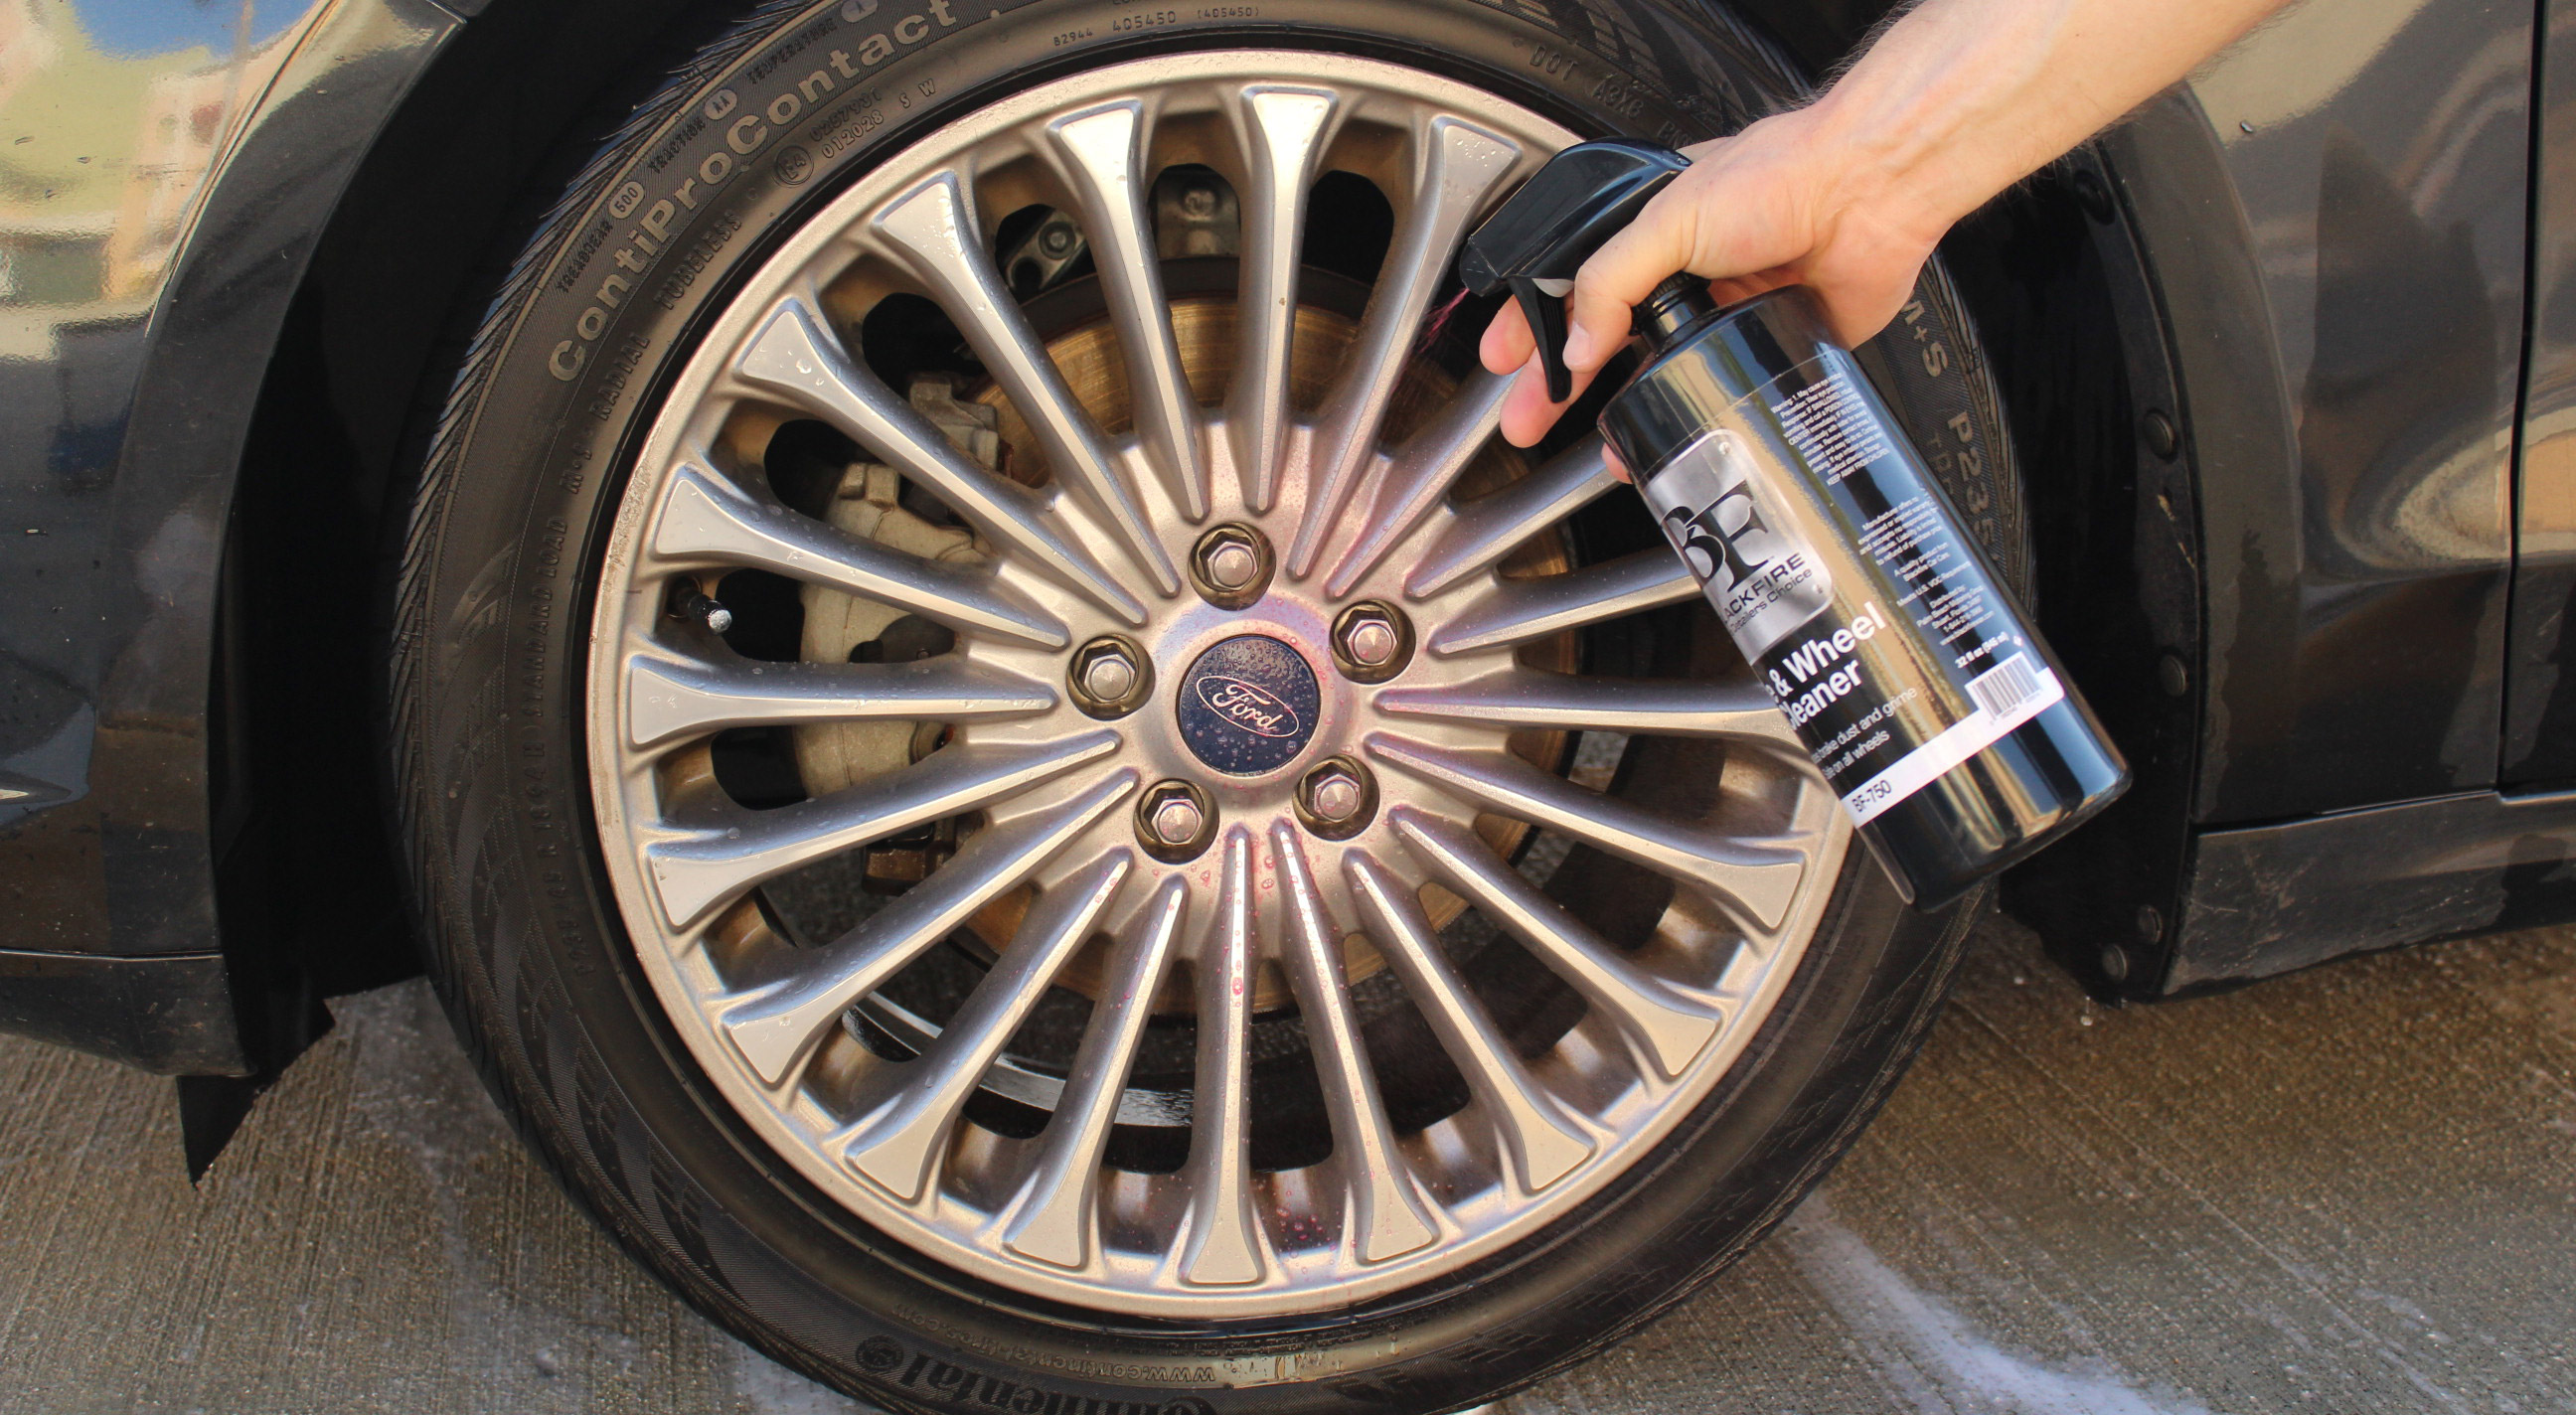 We are going to spray a GENEROUS amount of our BLACKFIRE Tire & Wheel cleaner all over the surface of the tires and rims.